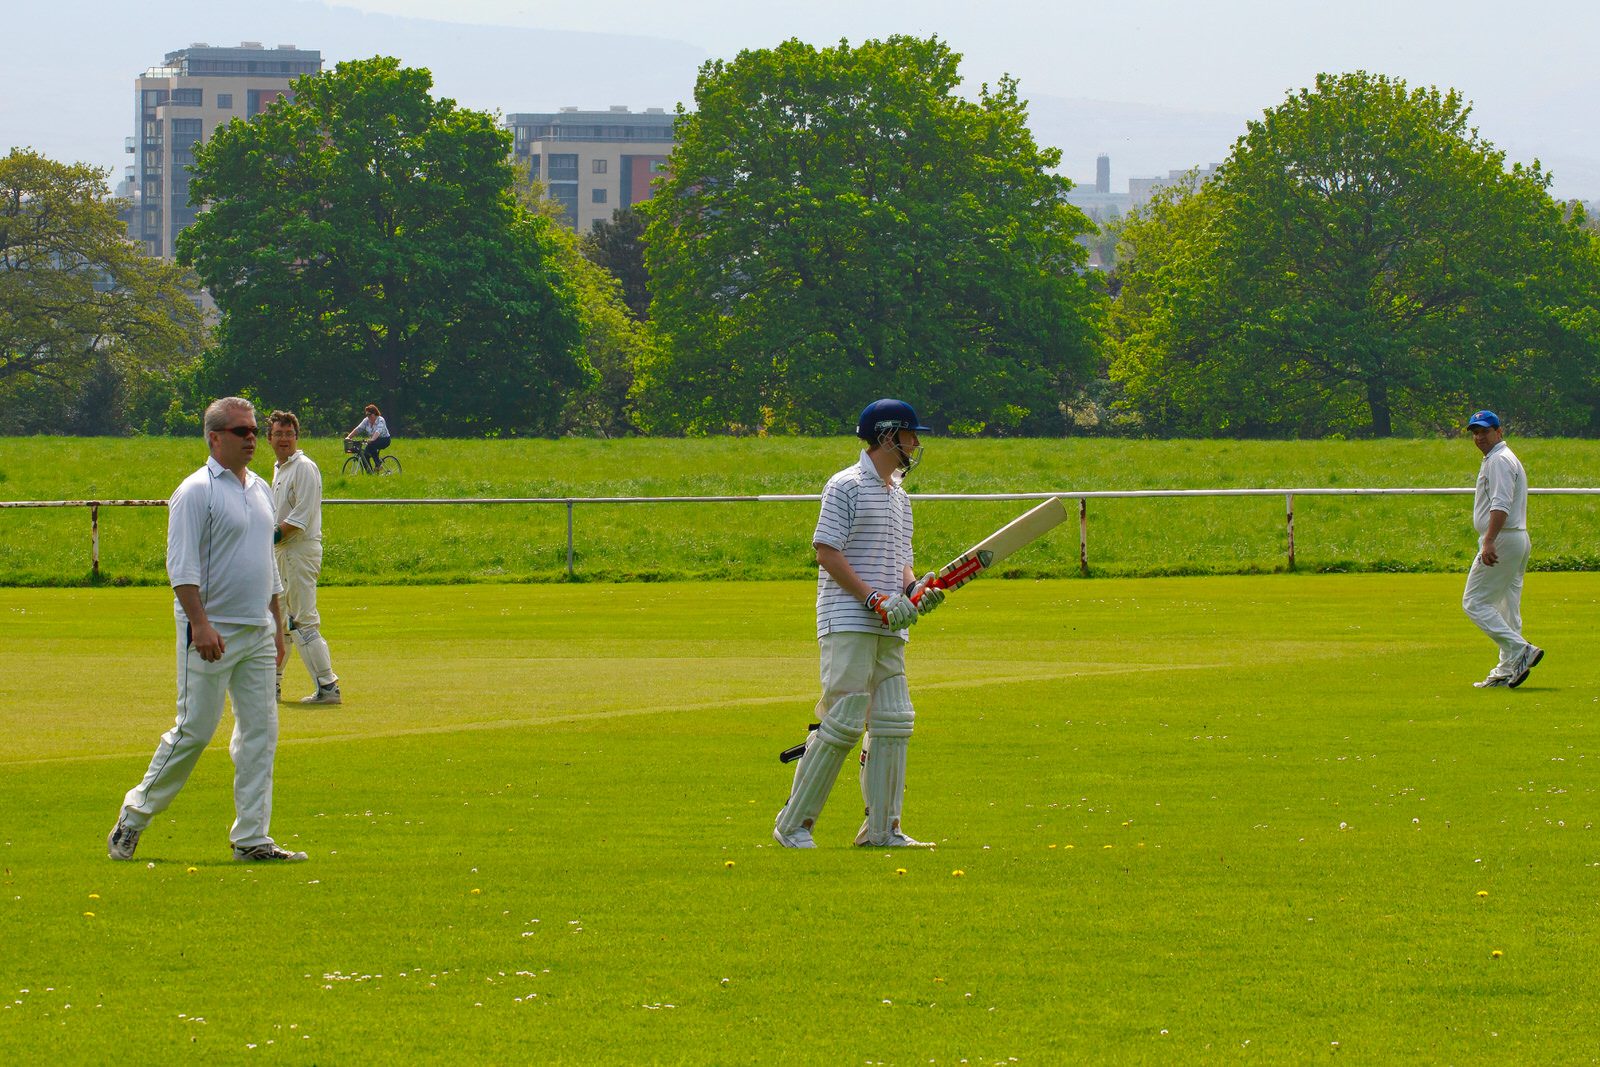 TWO CRICKET CLUBS IN PHOENIX PARK NEAR THE WELLINGTON MONUMENT 006